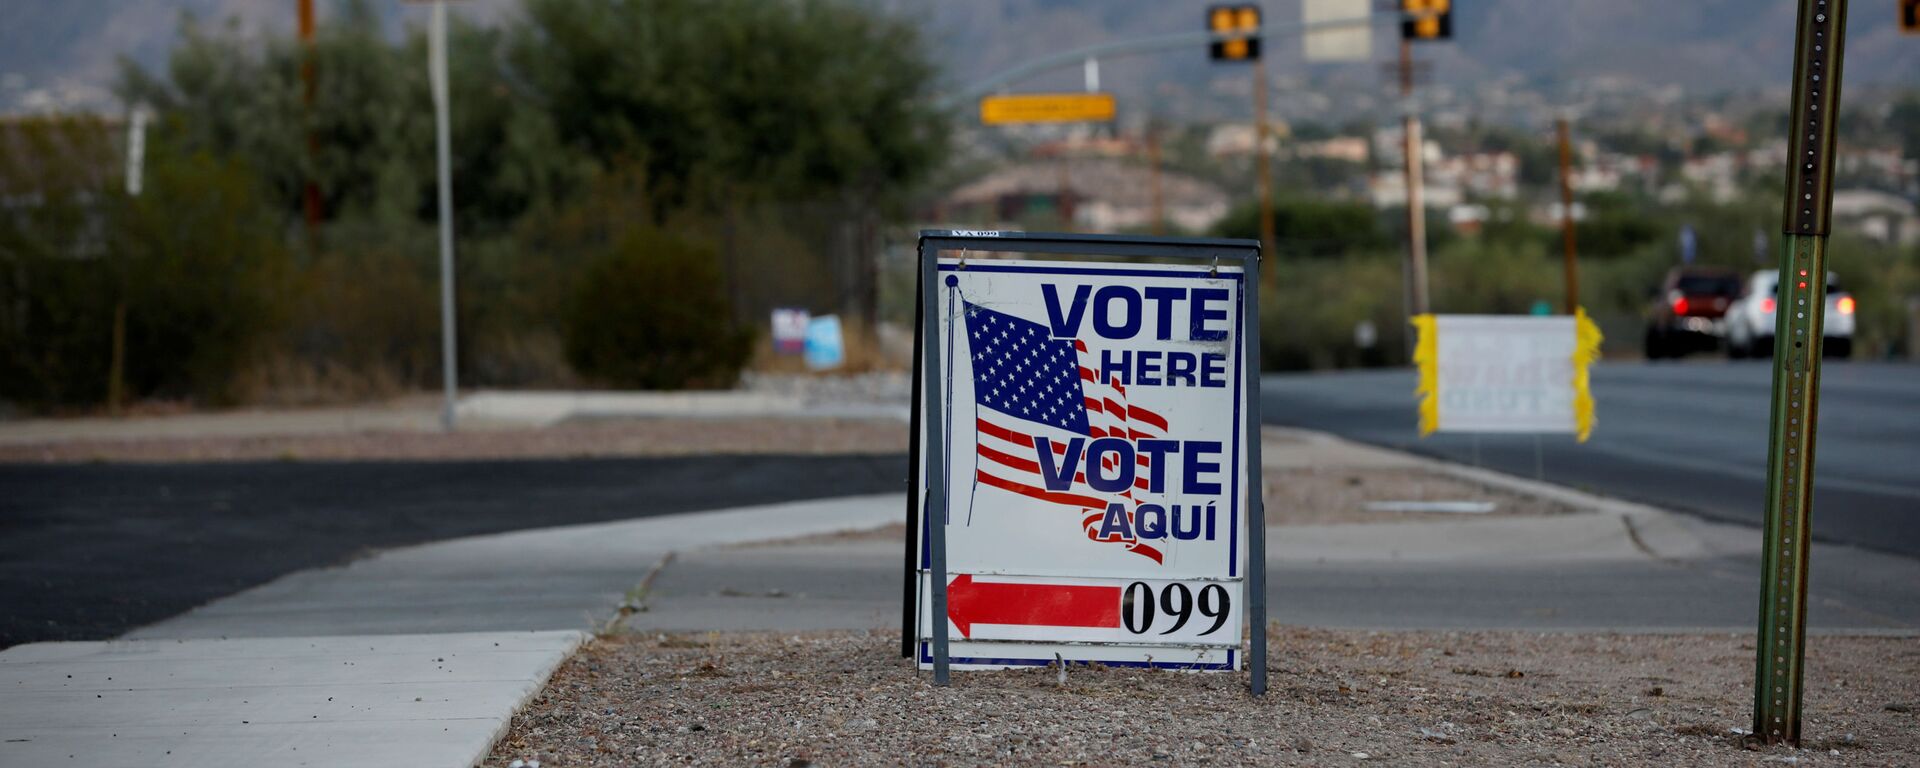 Sign directs voters to a polling station on Election Day in Tucson, Arizona, U.S. November 3, 2020 - Sputnik International, 1920, 14.07.2021